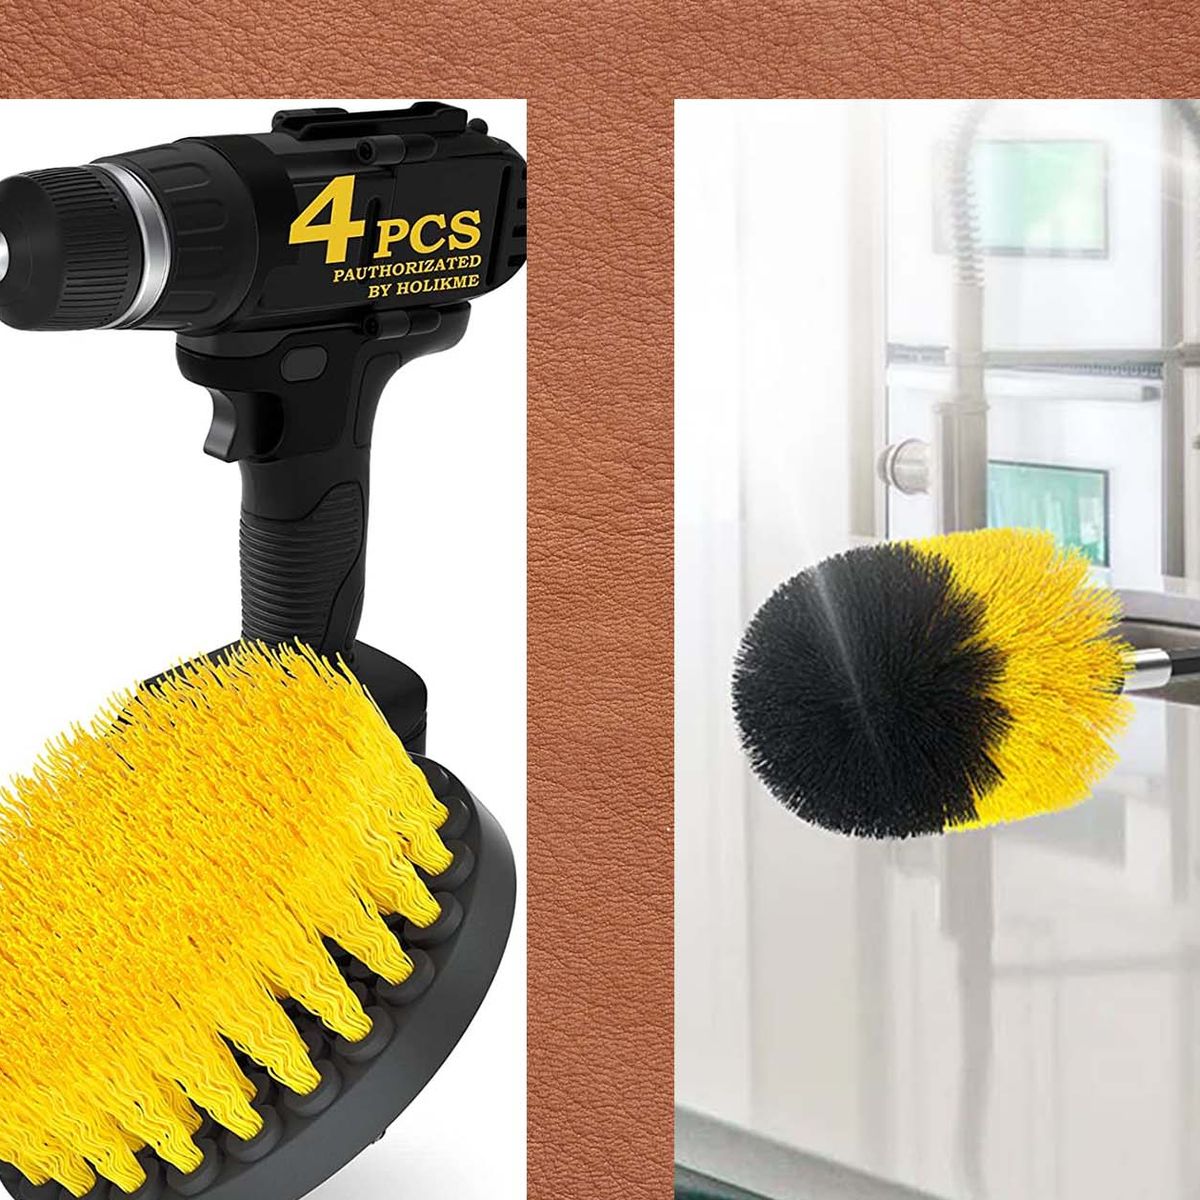 Clean Grout like a Pro using the THE EDGE BRUSH  New Product from  Drillbrush Power Scrubber 